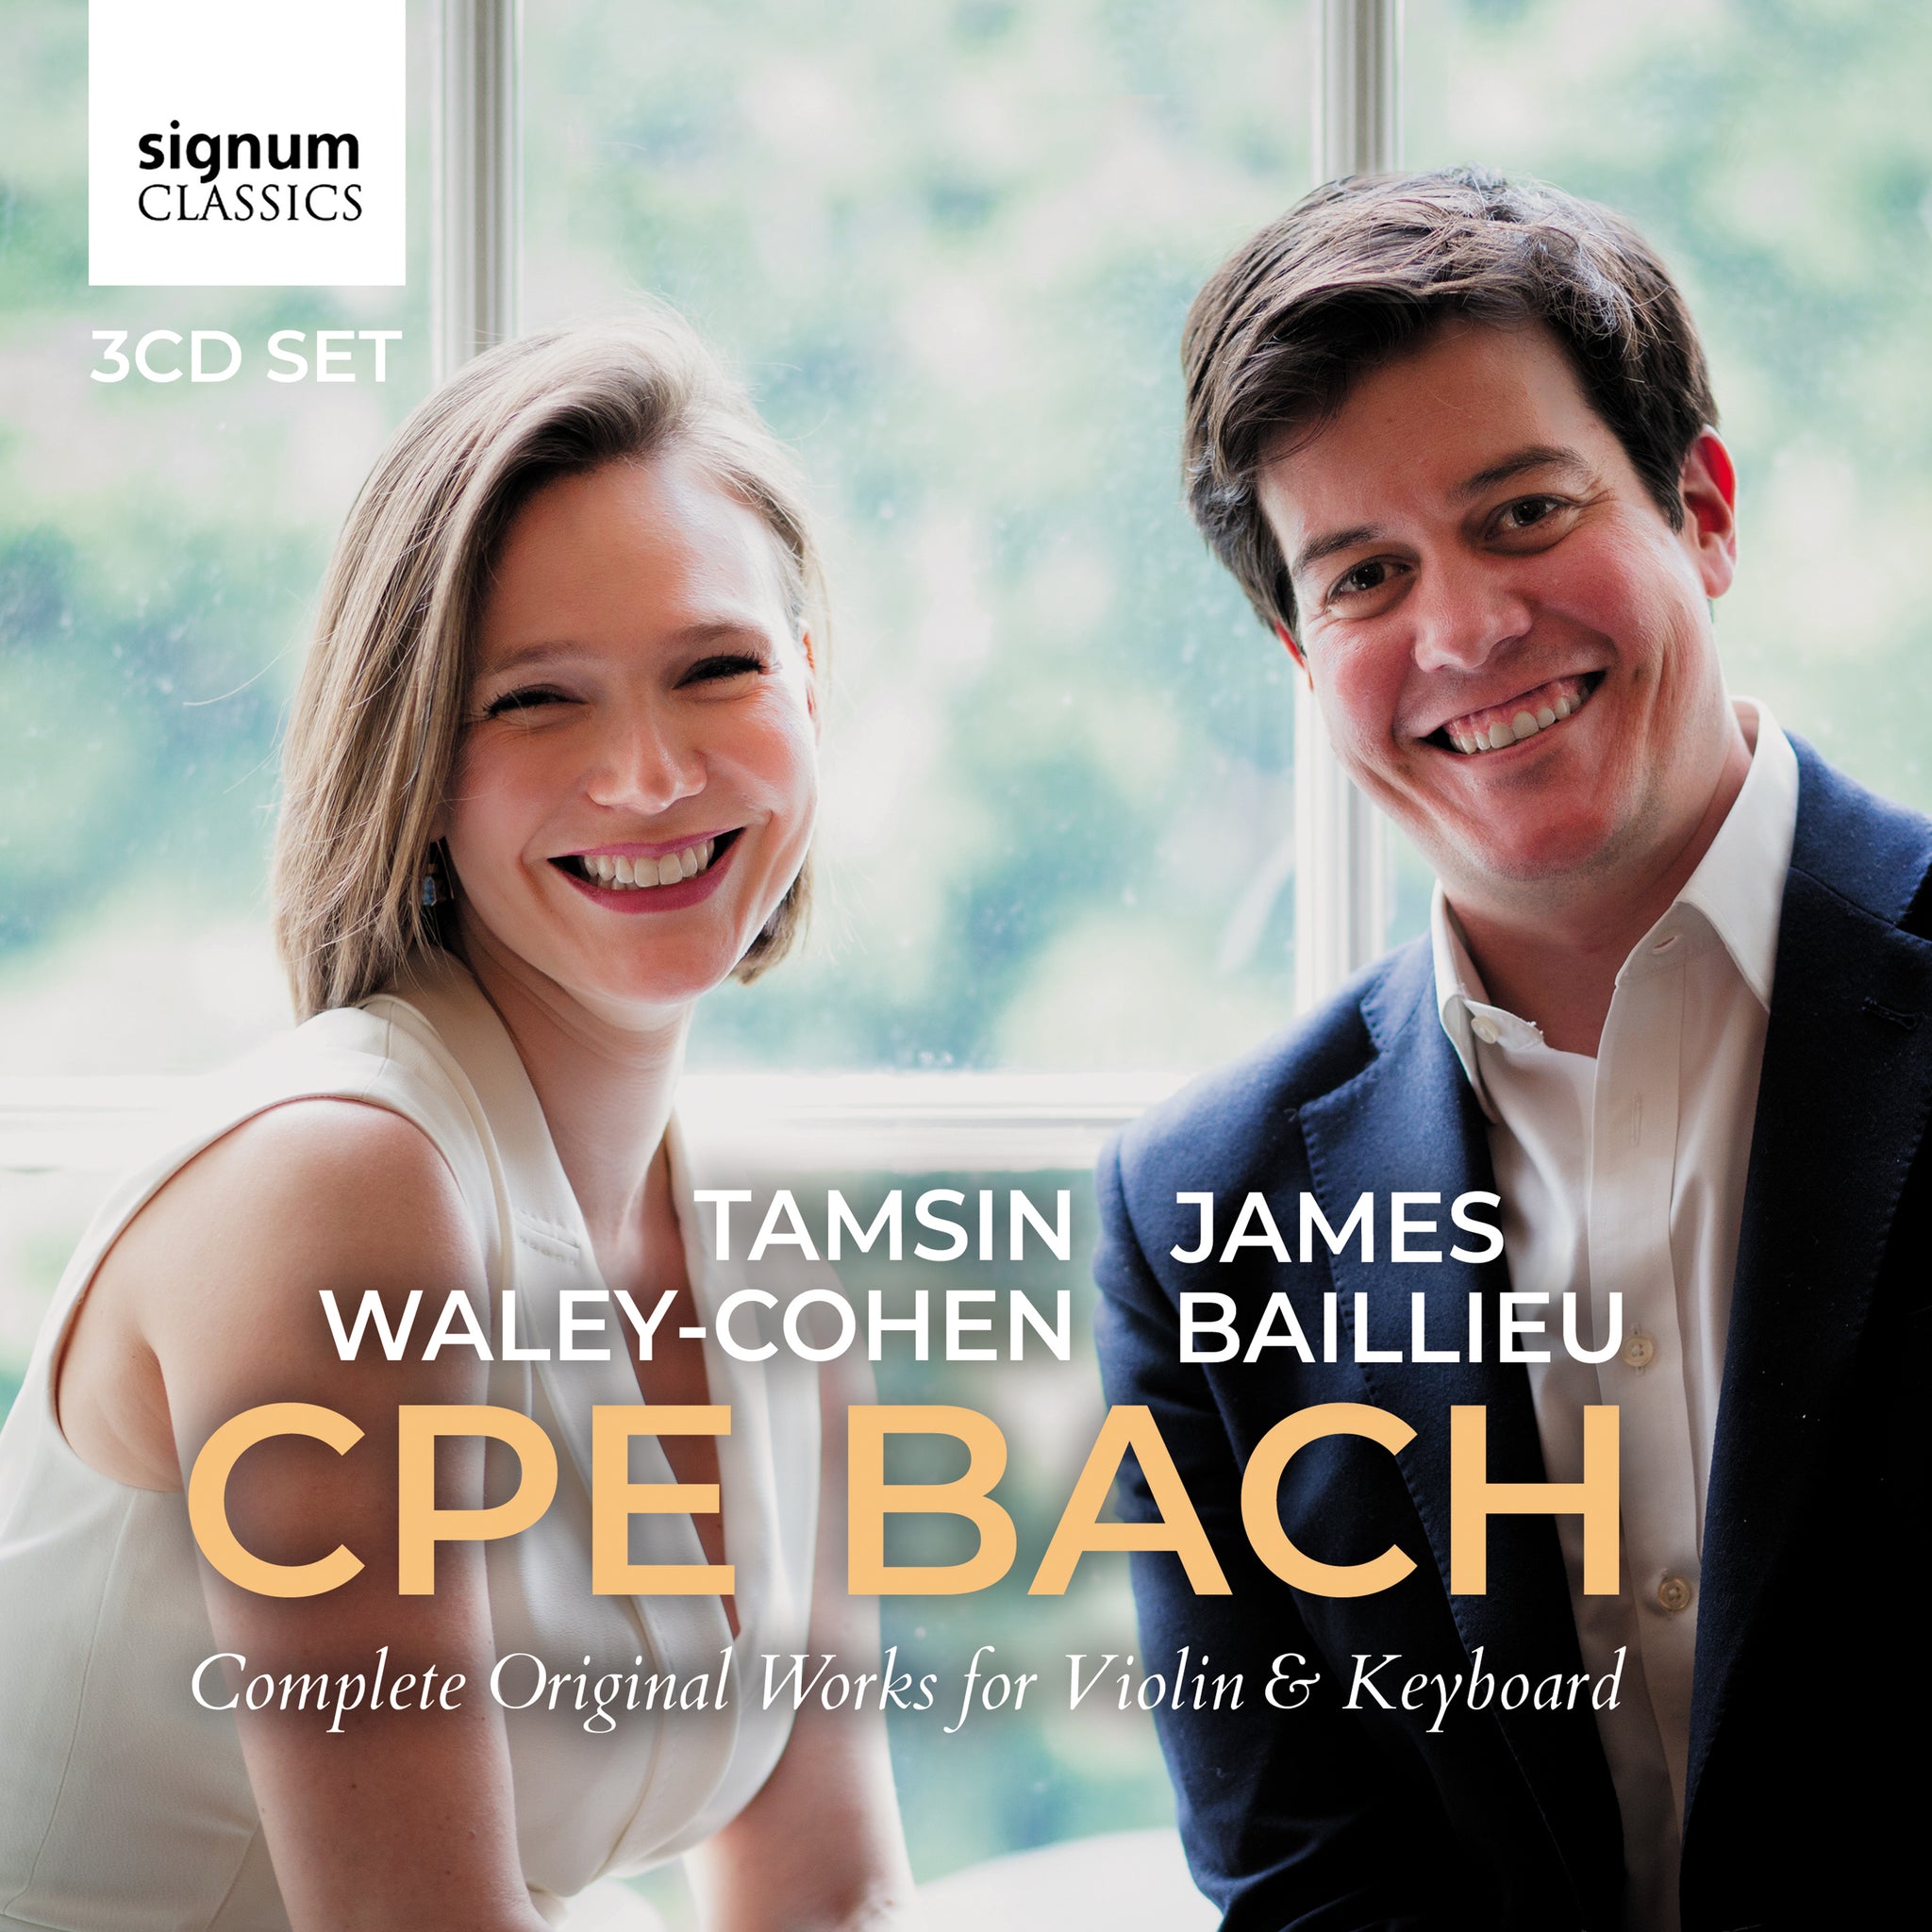 C.P.E Bach: Complete Original Works for Violin and Keyboard / Waley-Cohen, Baillieu